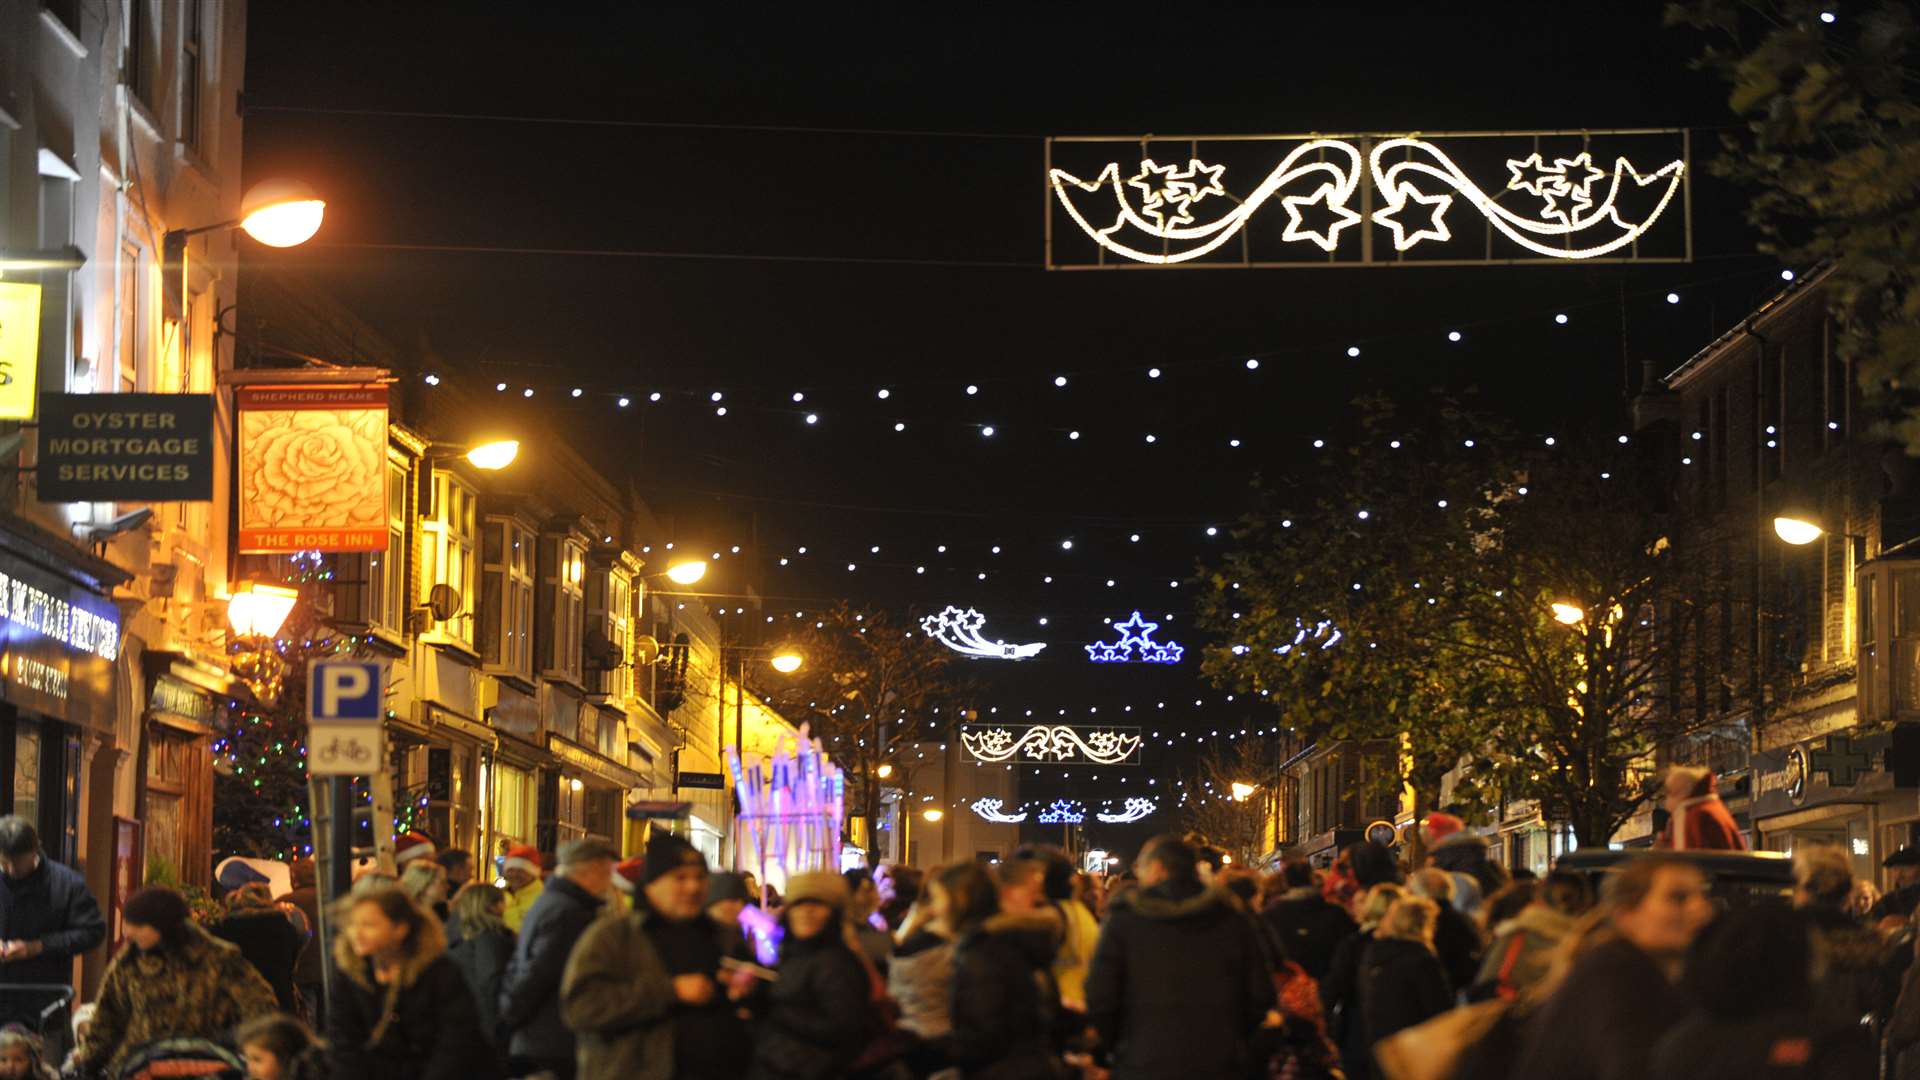 The town was brought to life with Christmas sparkle